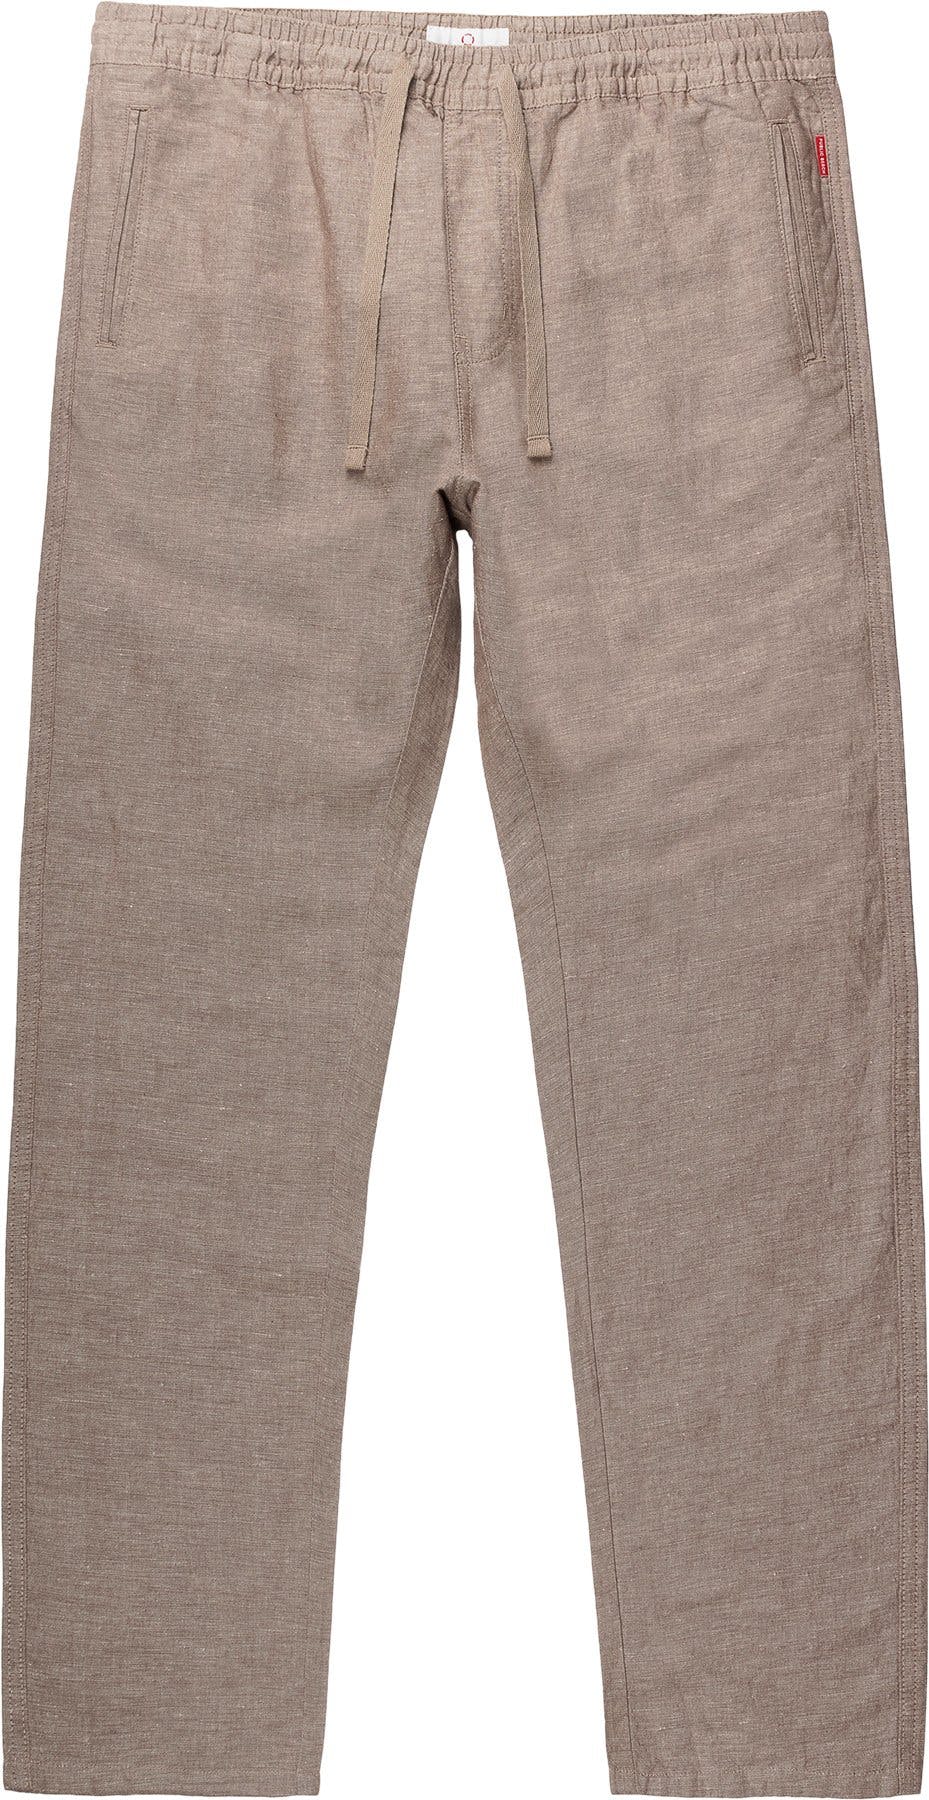 Product image for Linen Blend Pull-On Pant - Men's